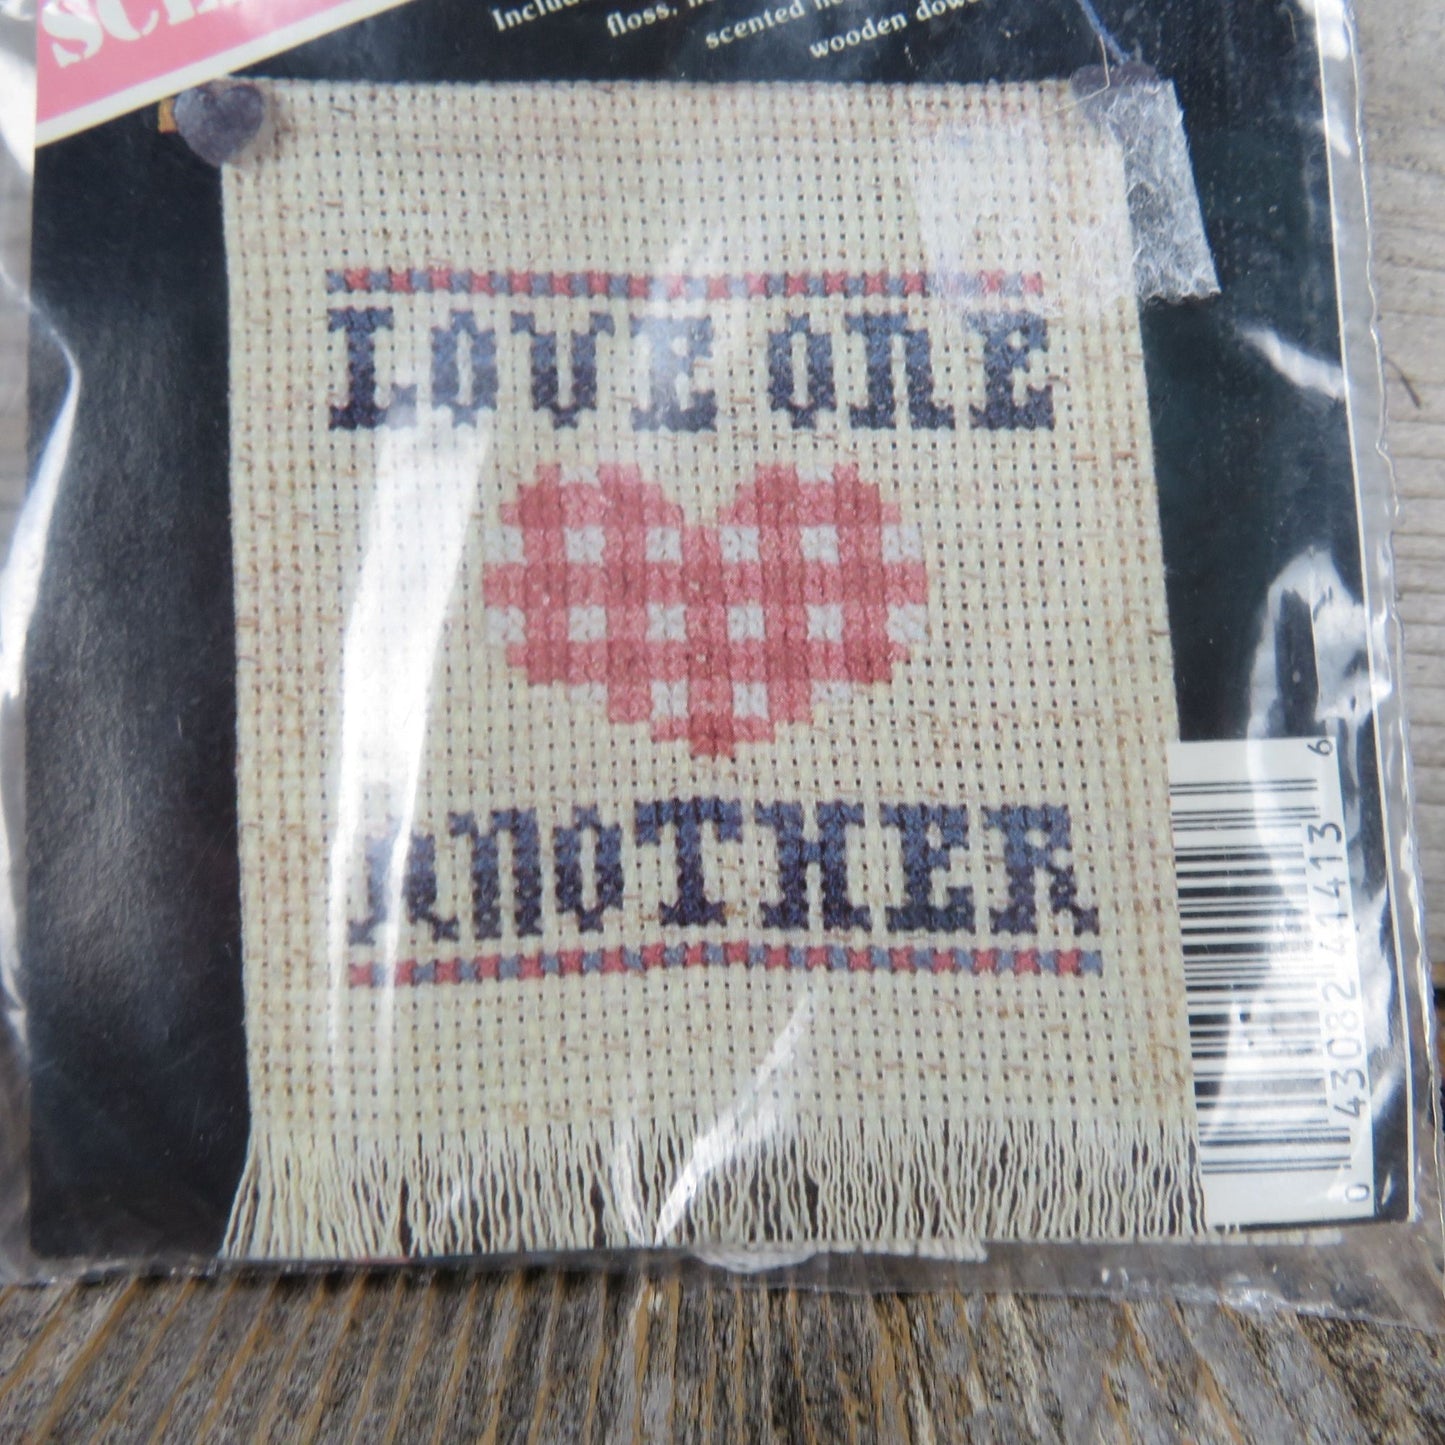 Counted Cross Love One Another Sampler Ornament Banar Designs SS-413 Tiny Sign